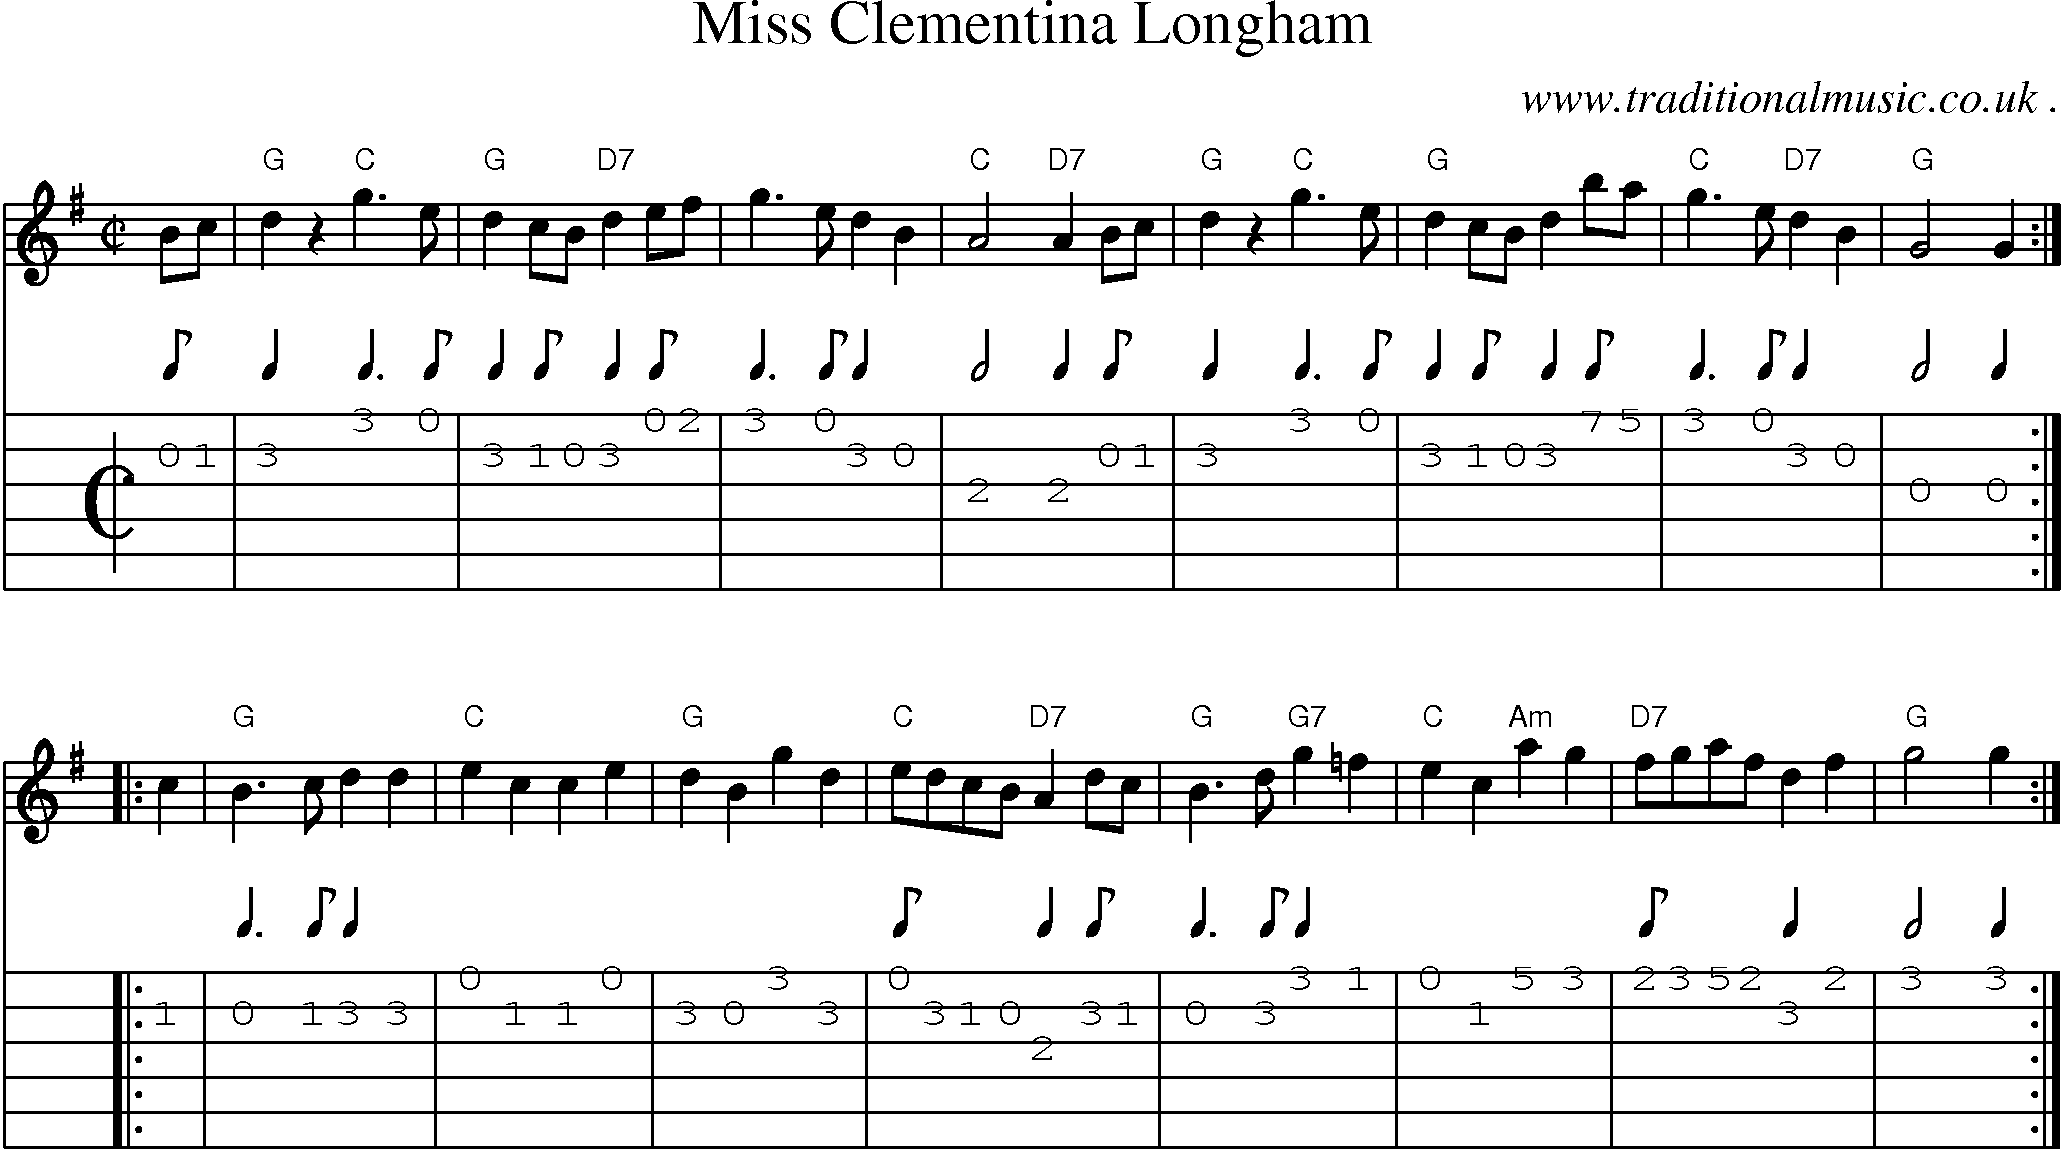 Sheet-music  score, Chords and Guitar Tabs for Miss Clementina Longham